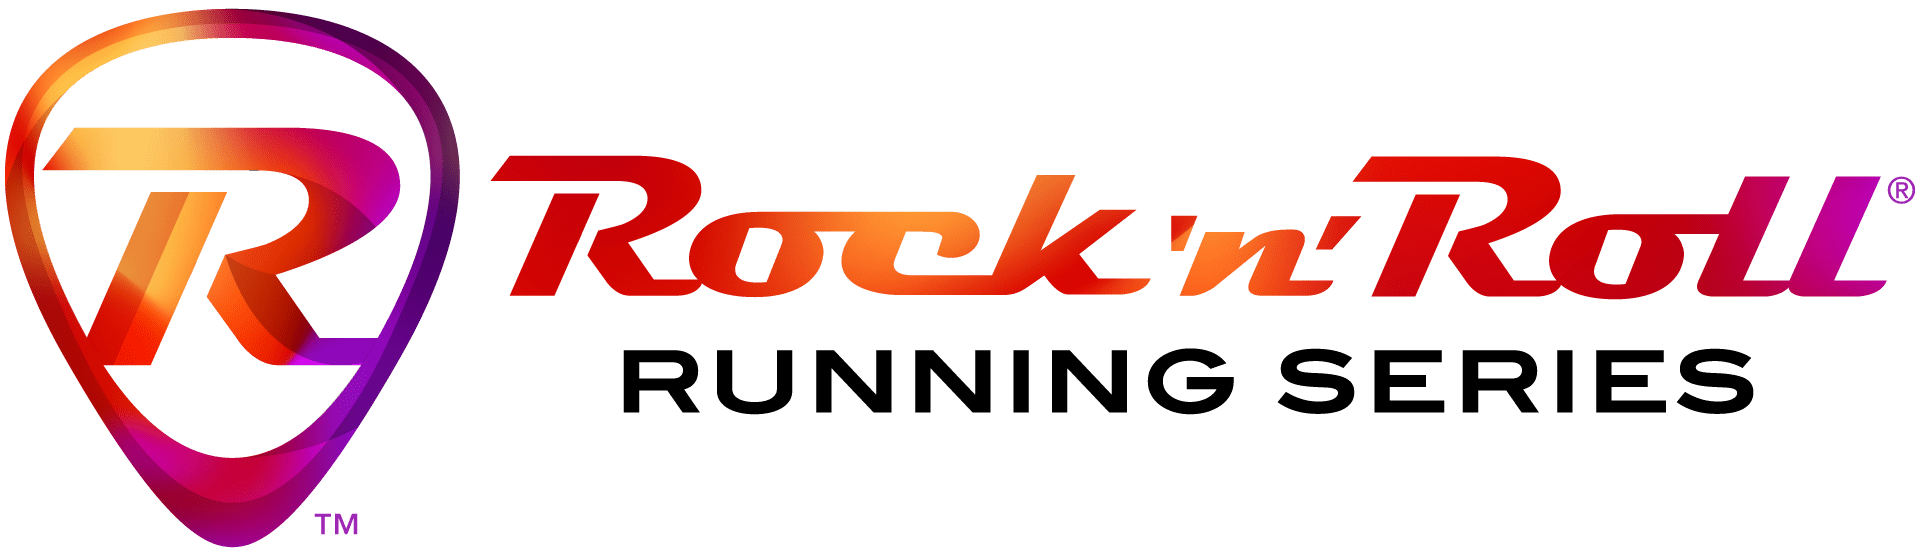 Rock 'n' Roll Running Series to Celebrate Global Running Day